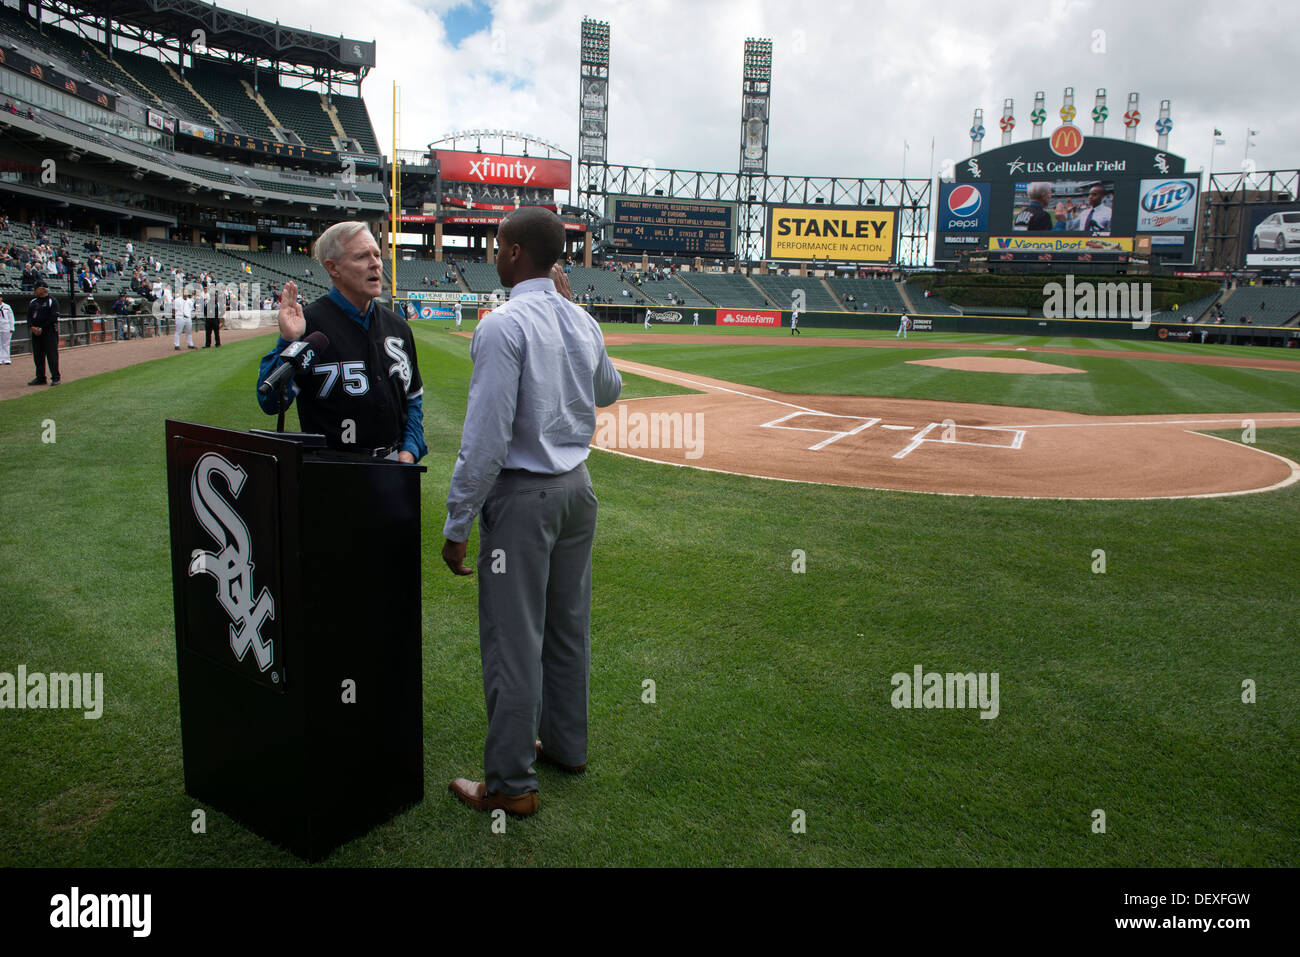 Secretary of the Navy (SECNAV) Ray Mabus administers the oath of office to Ensign Jordan Robinson before a Chicago White Sox Major League Baseball game at Cellular Field. While in Chicago, Mabus took part in a Navy-sponsored Science, Technology, Engineeri Stock Photo